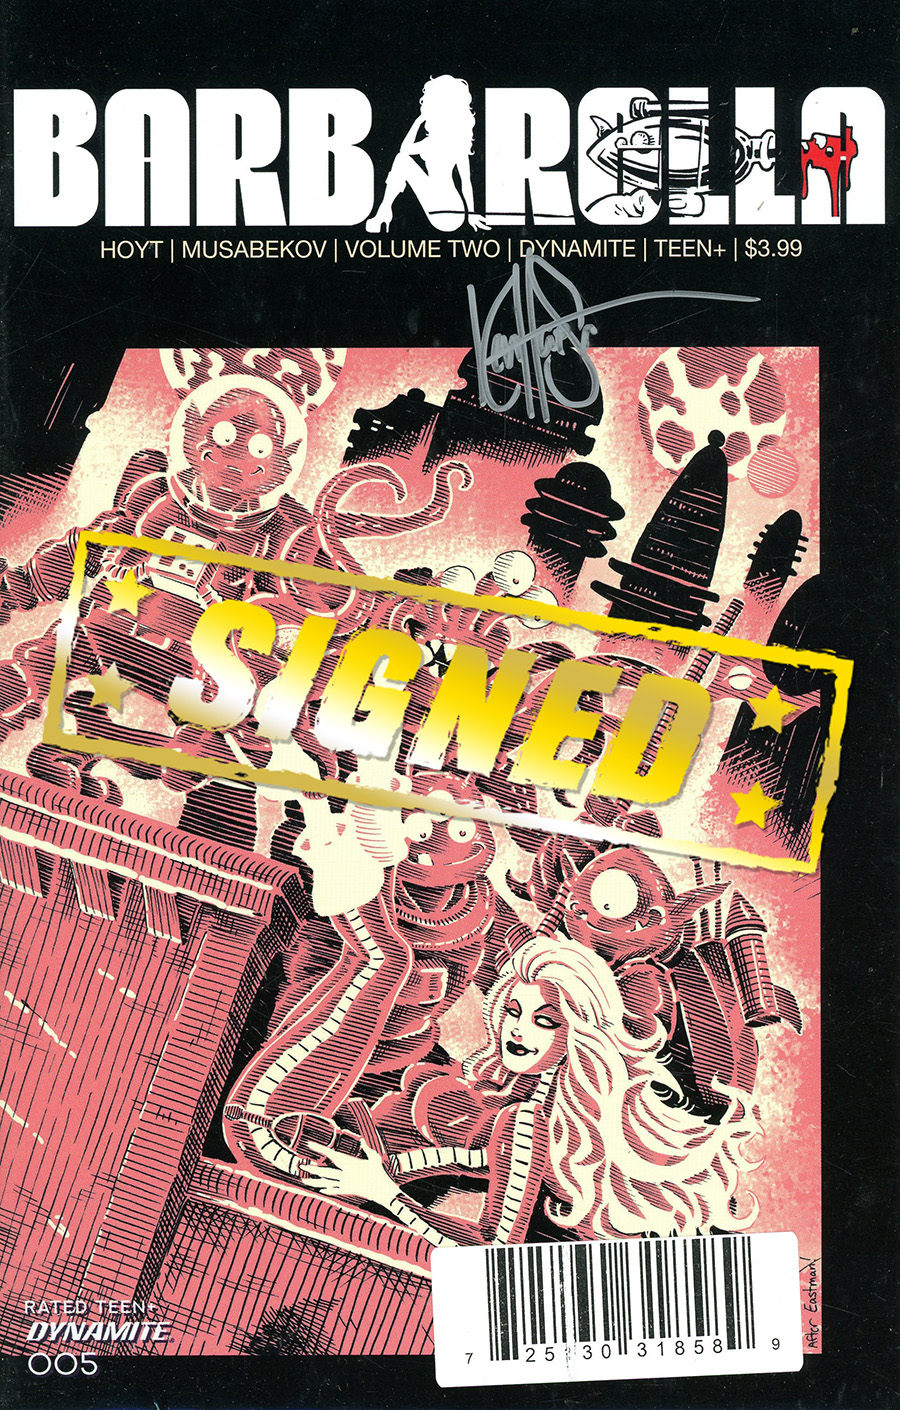 Barbarella Vol 2 #5 Cover S DF Limited Edition Ken Haeser TMNT Homage Variant Cover Signed By Ken Haeser